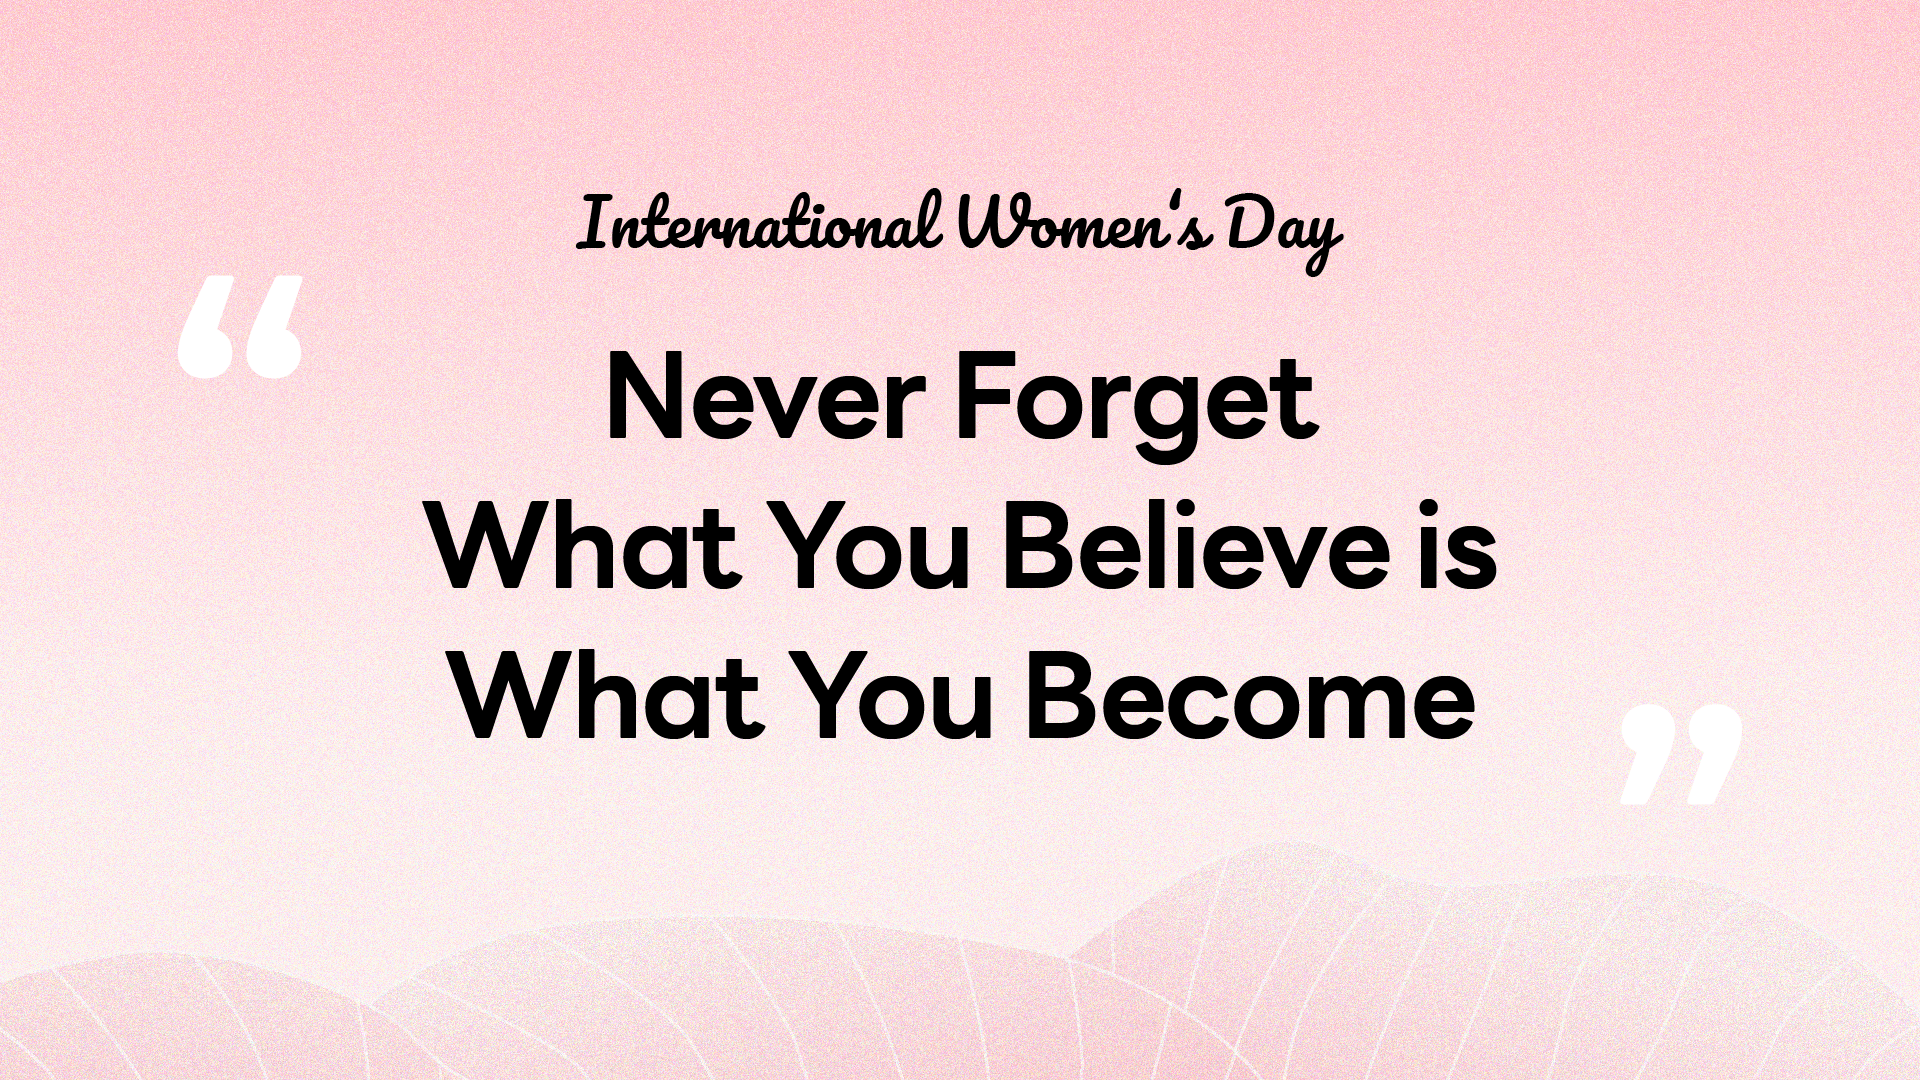 You Are What You Believe: Inspiring Women on International Women's Day